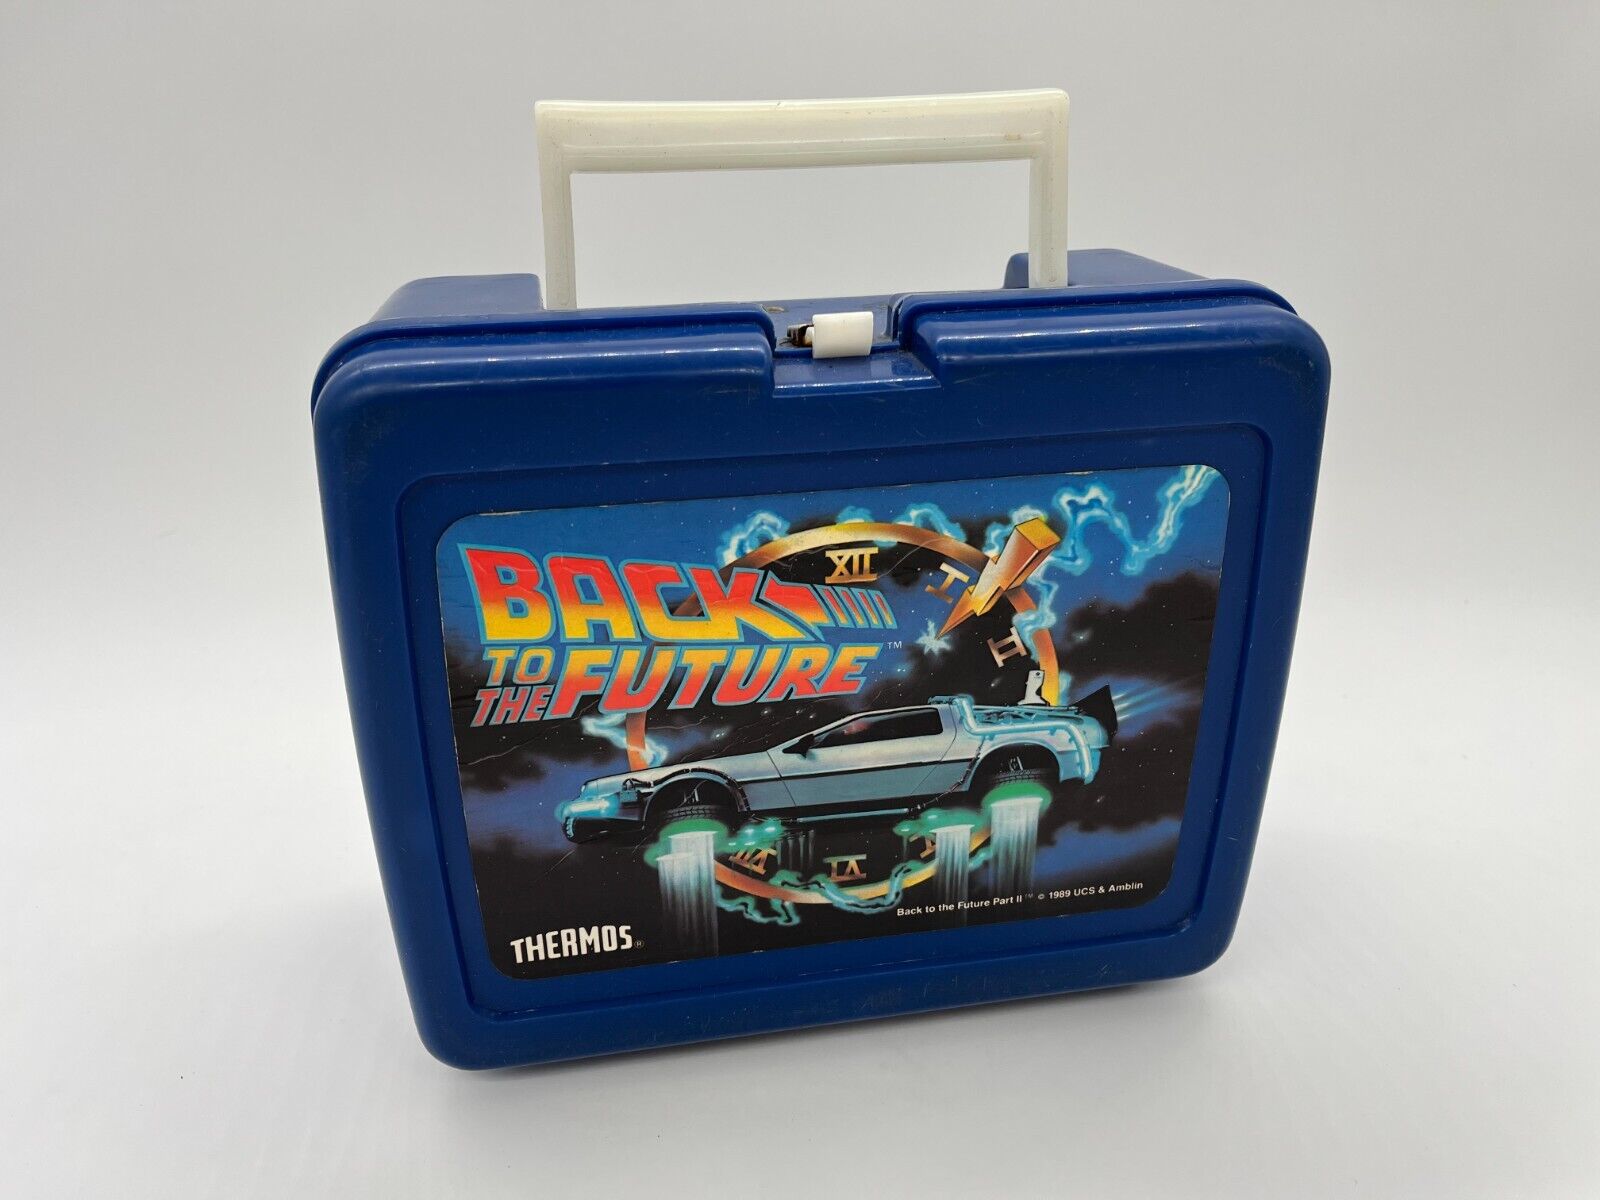 Vintage Back To The Future II Part 2 Lunchbox Thermos Blue Delorean Time Machine